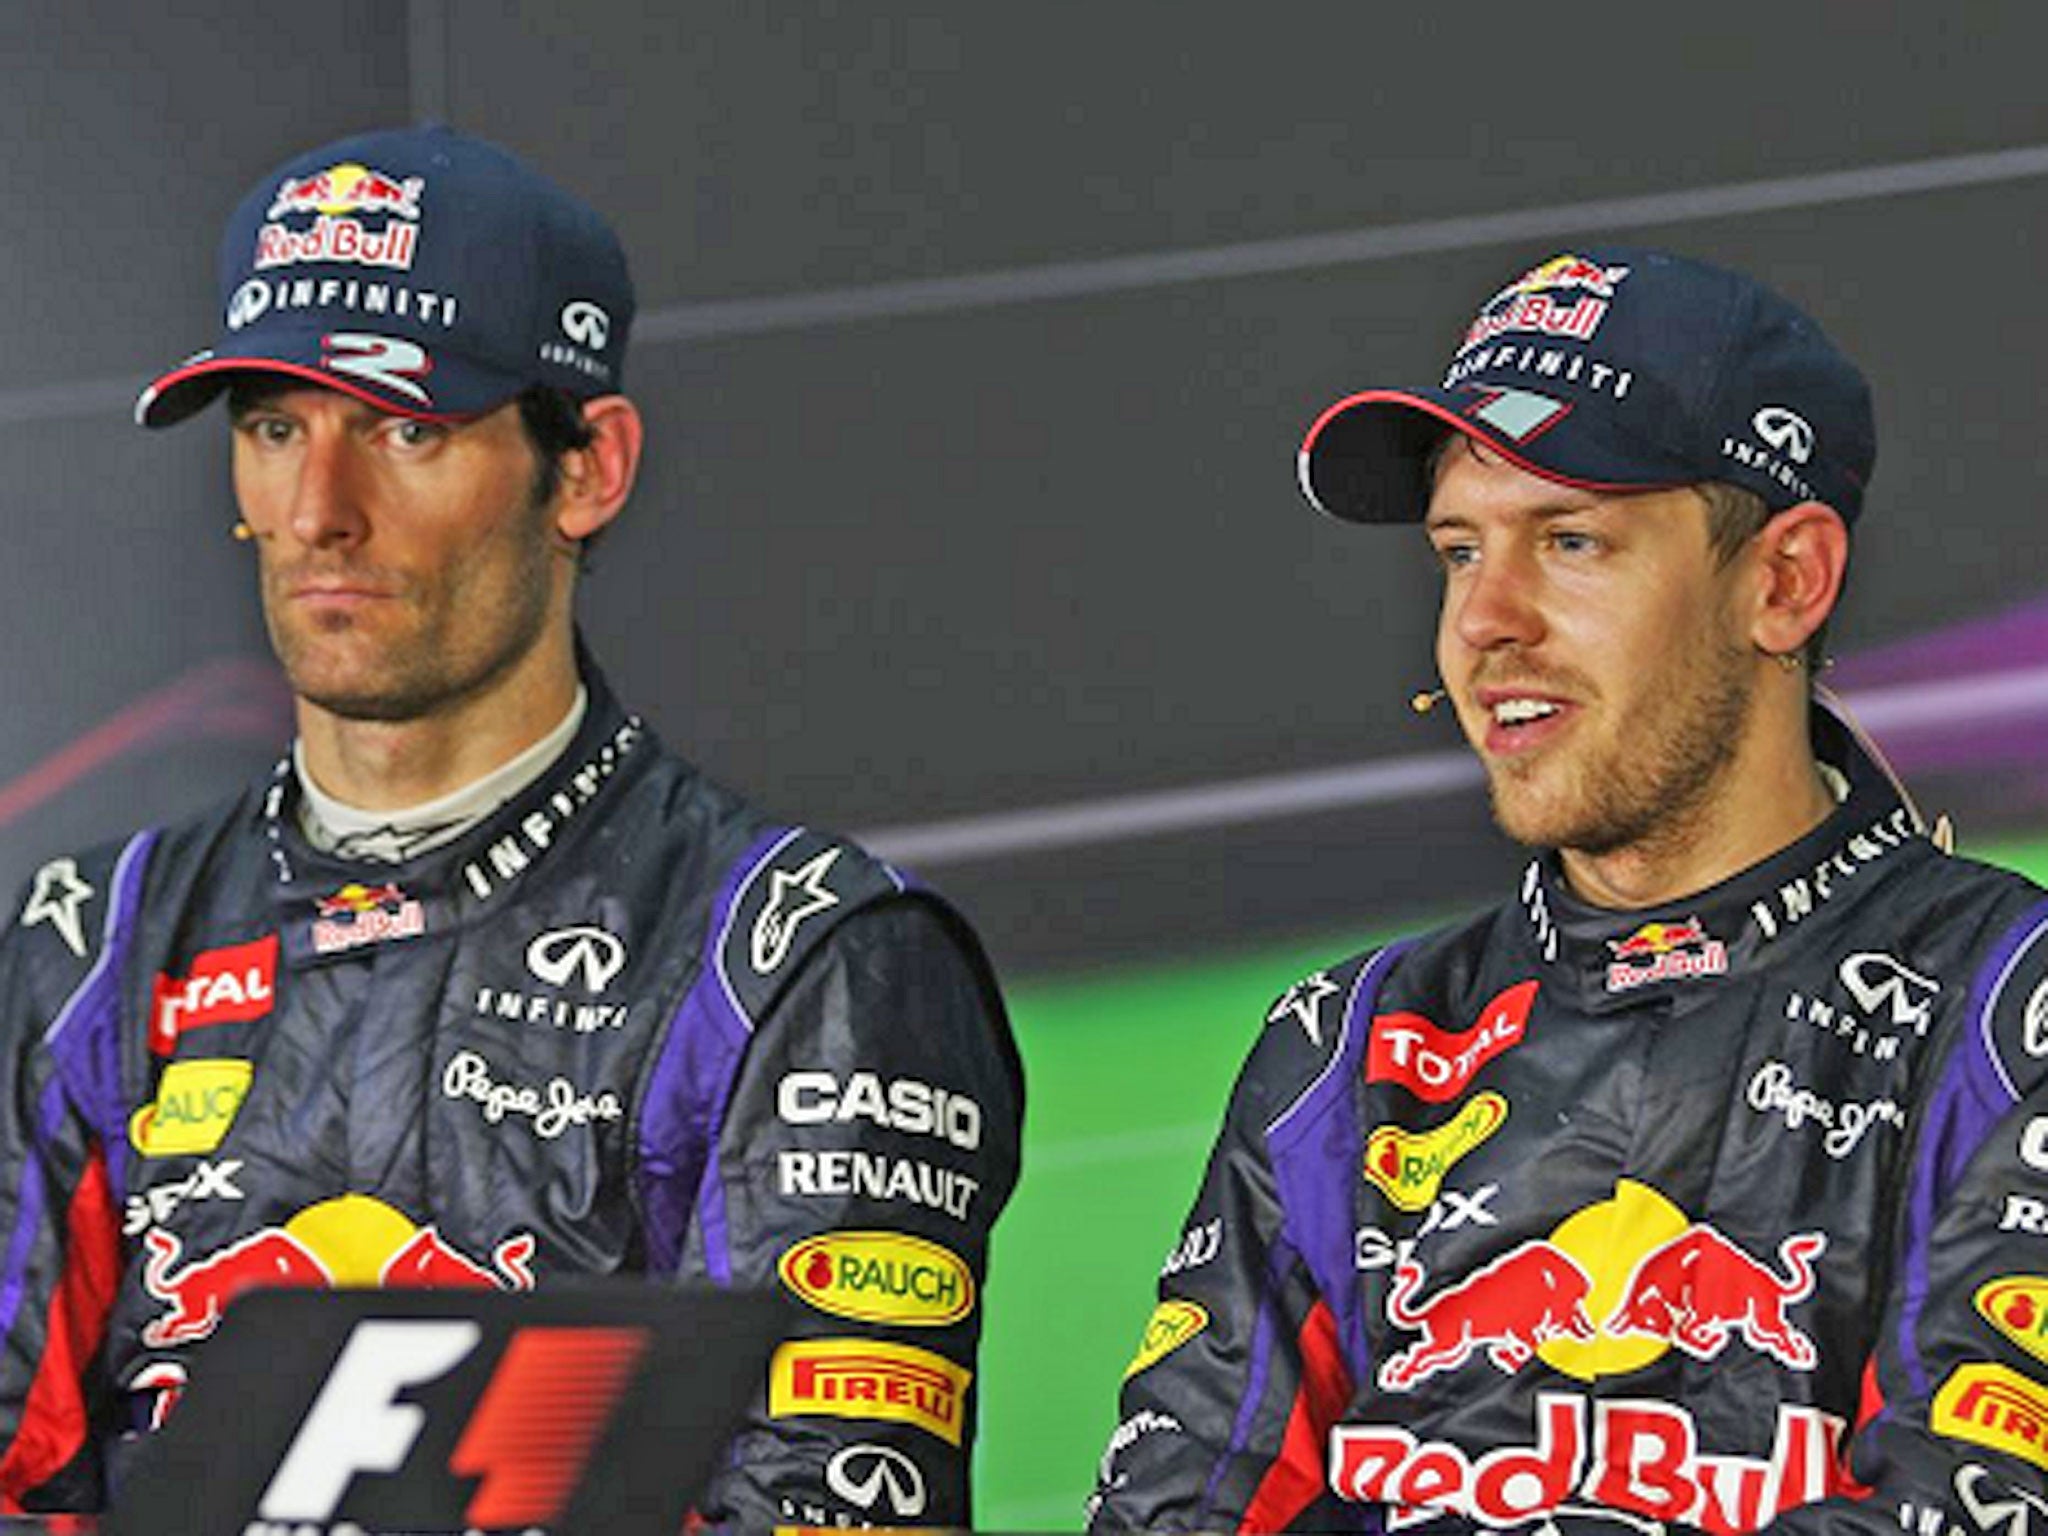 Webber fumes after Vettel steals win in controversial end to Malaysian GP